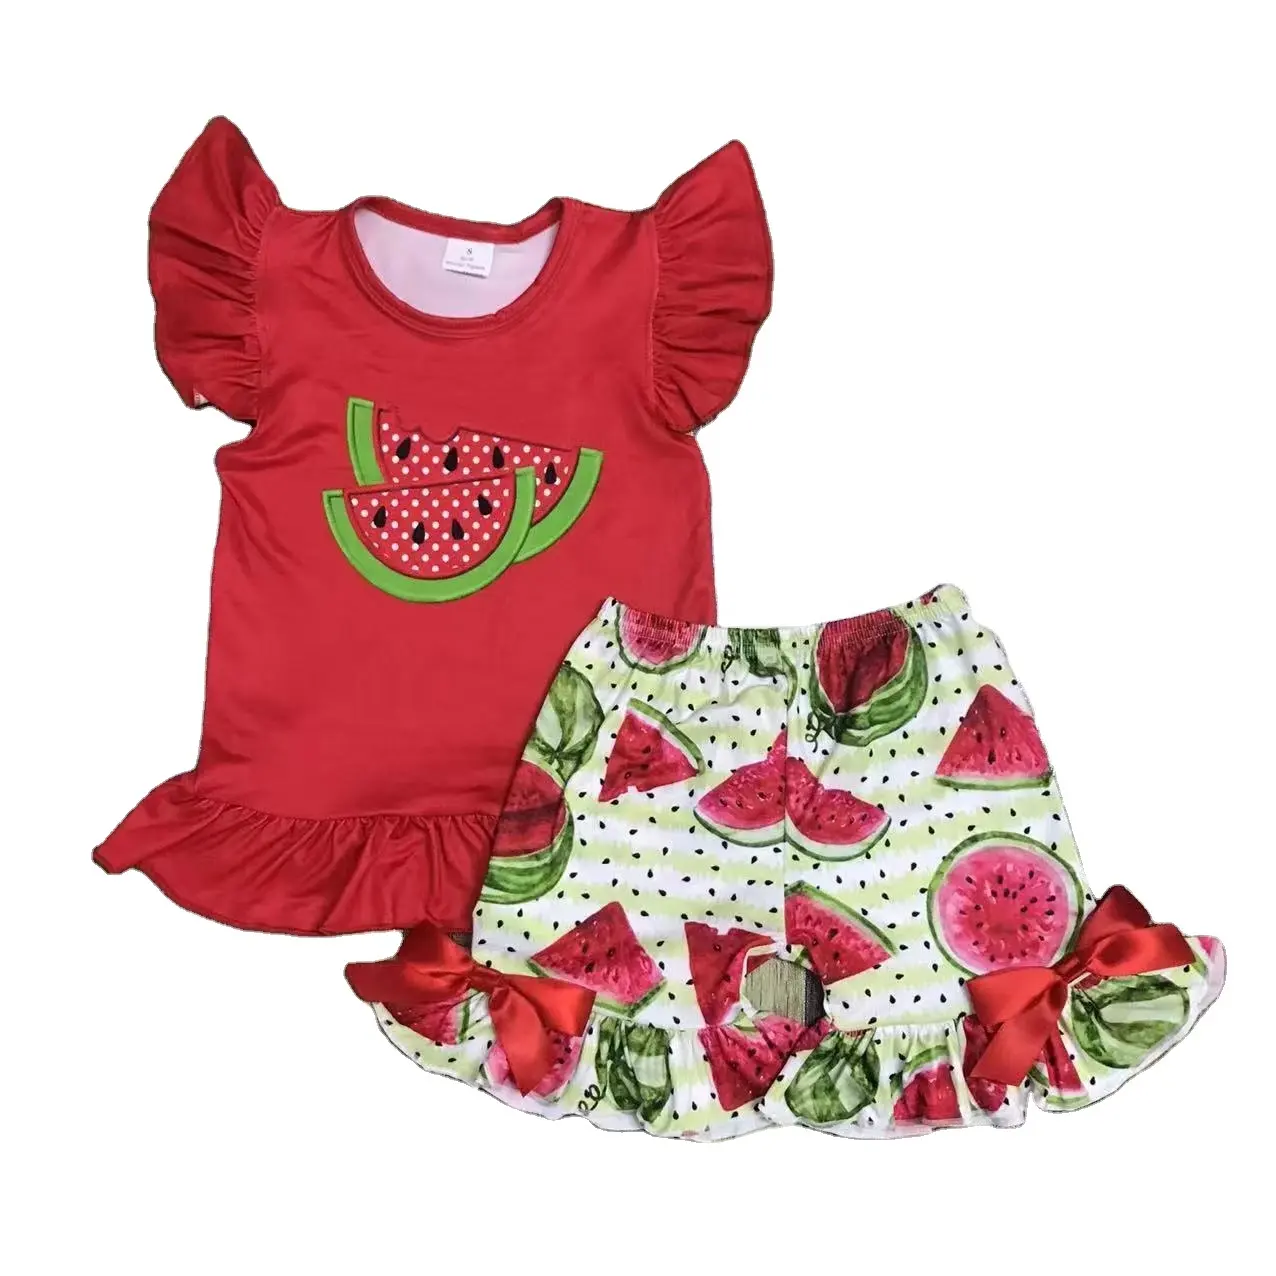 The latest hot selling boutique wholesale children's clothes watermelon red sleeveless top green shorts girl suit